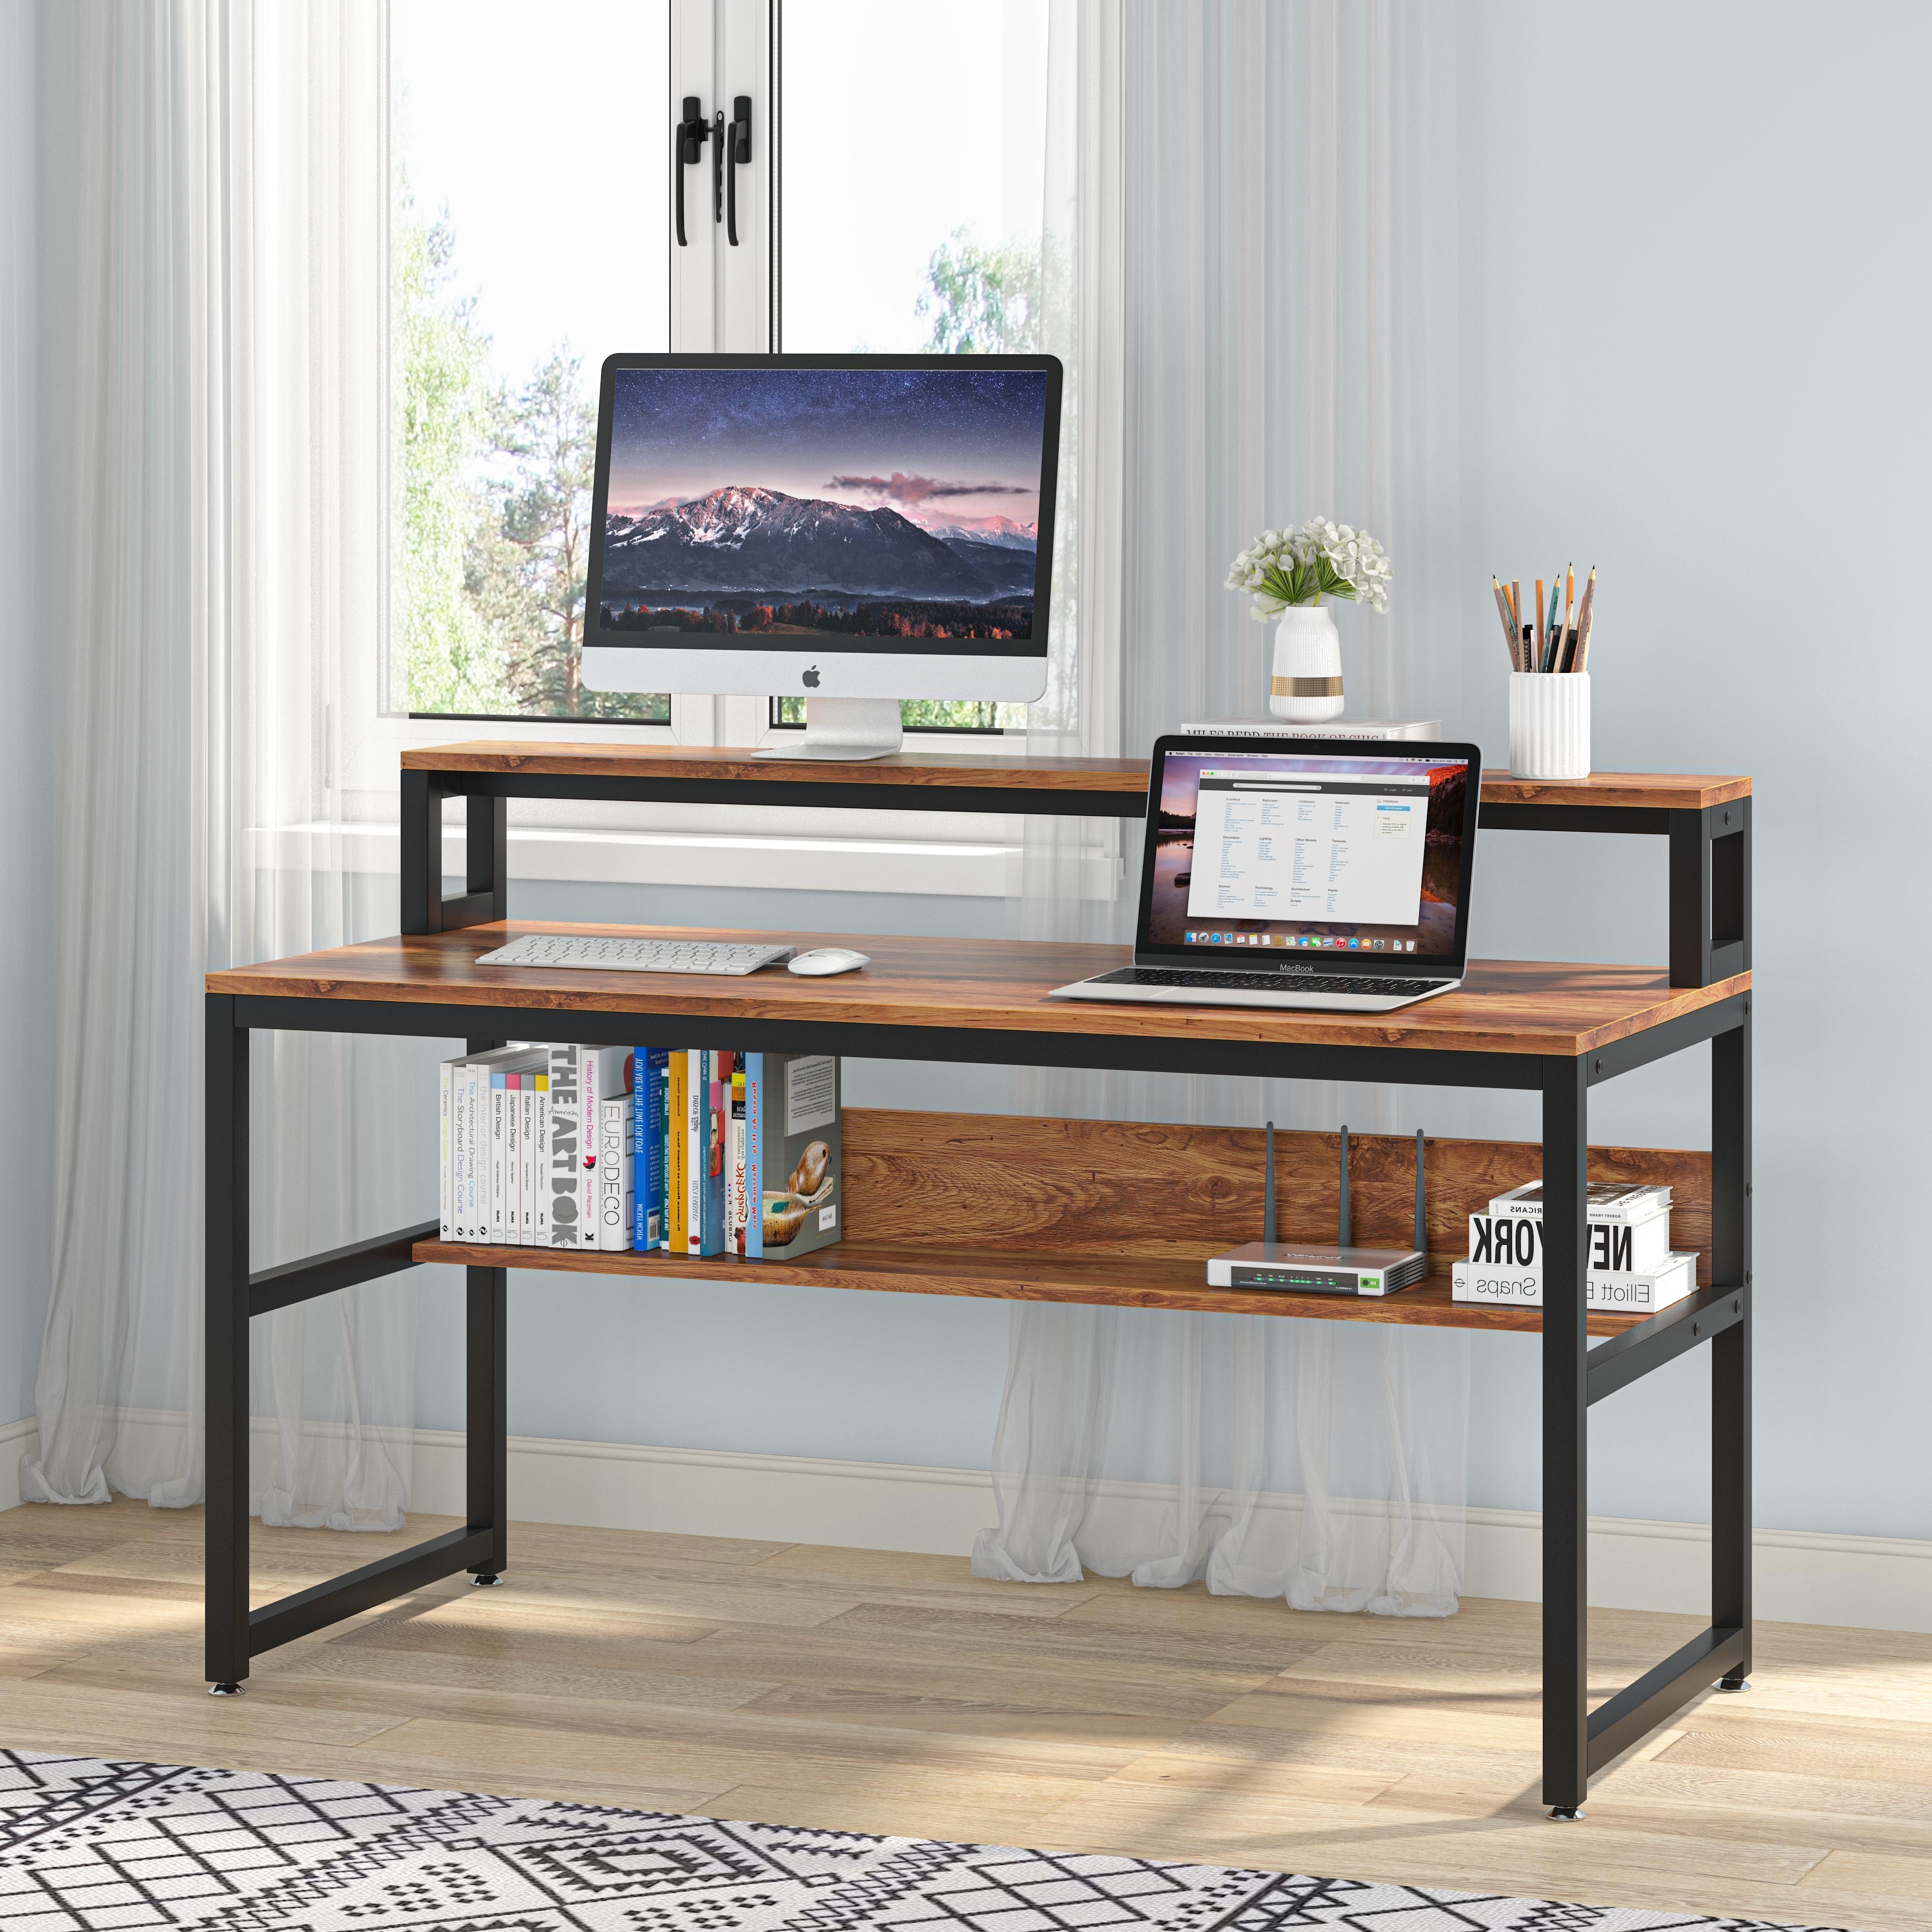 https://ak1.ostkcdn.com/images/products/is/images/direct/951d20b490d6747701884955339aaa2fff88afc3/55%27%27-Computer-Desk-with-Monitor-Stand%2C-Office-Desk-Writing-Desk-with-Shelf.jpg